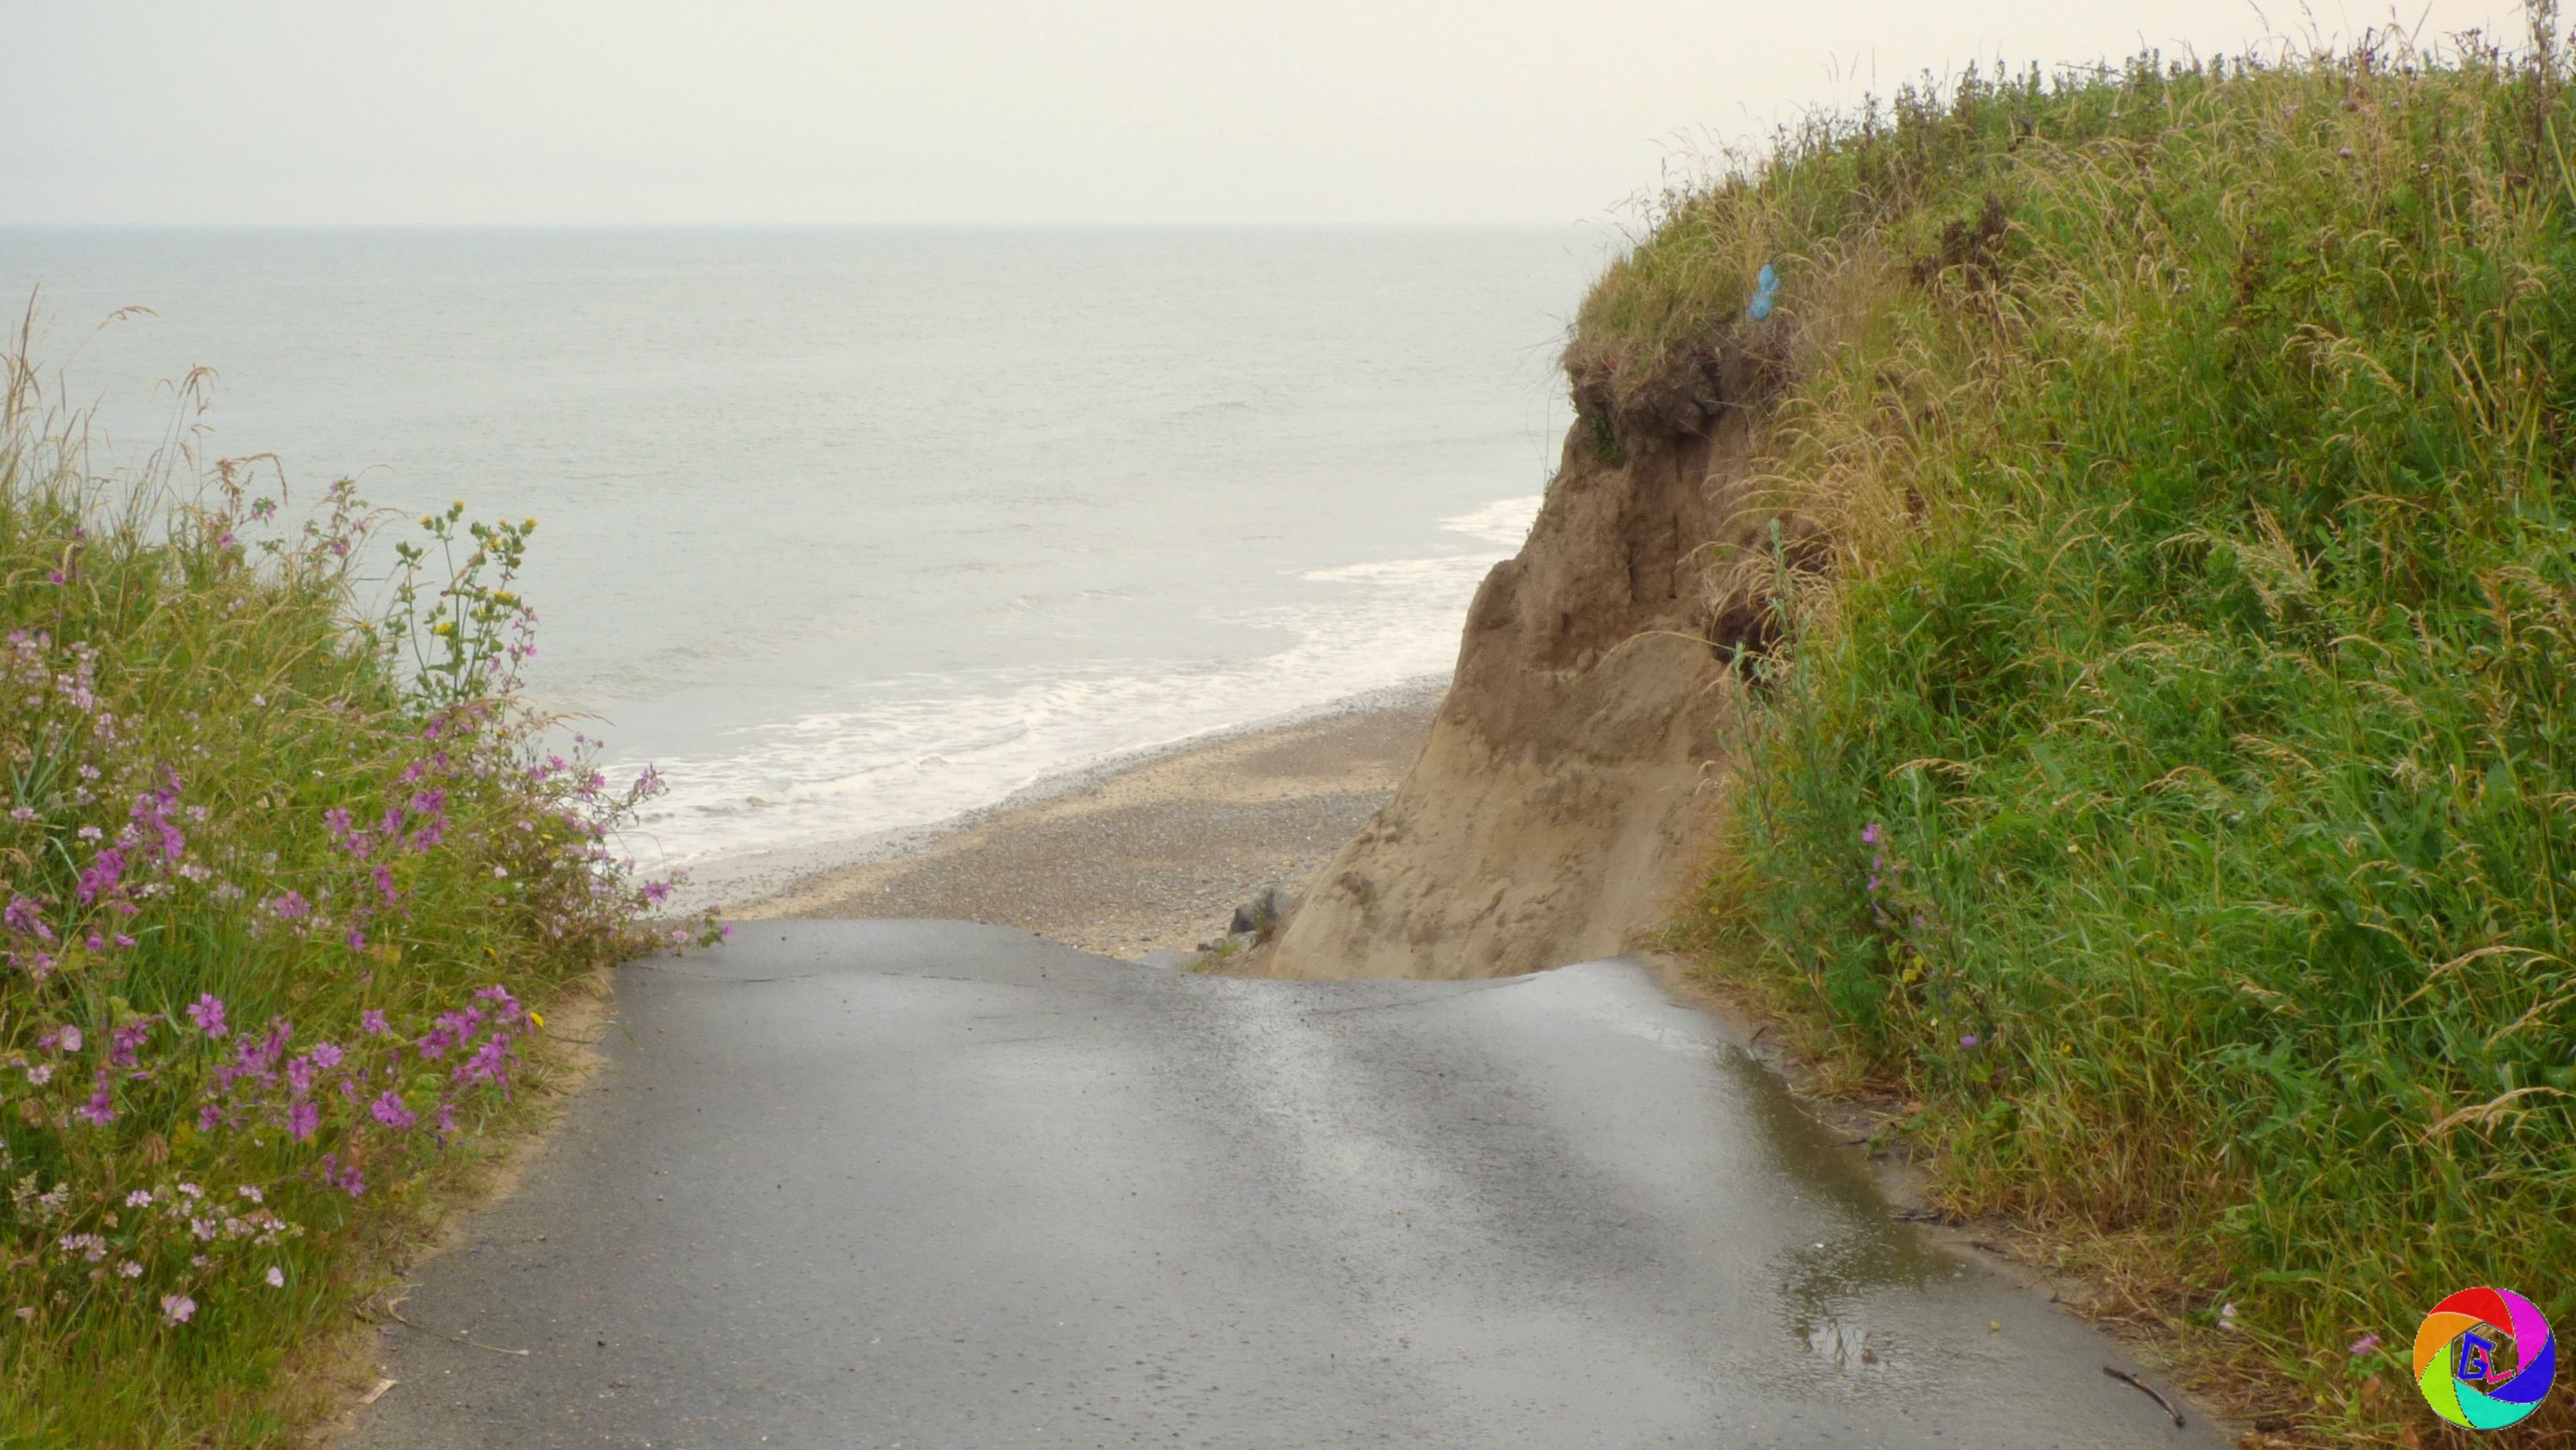 Road that led to the sea front cottages, destroyed by erosion